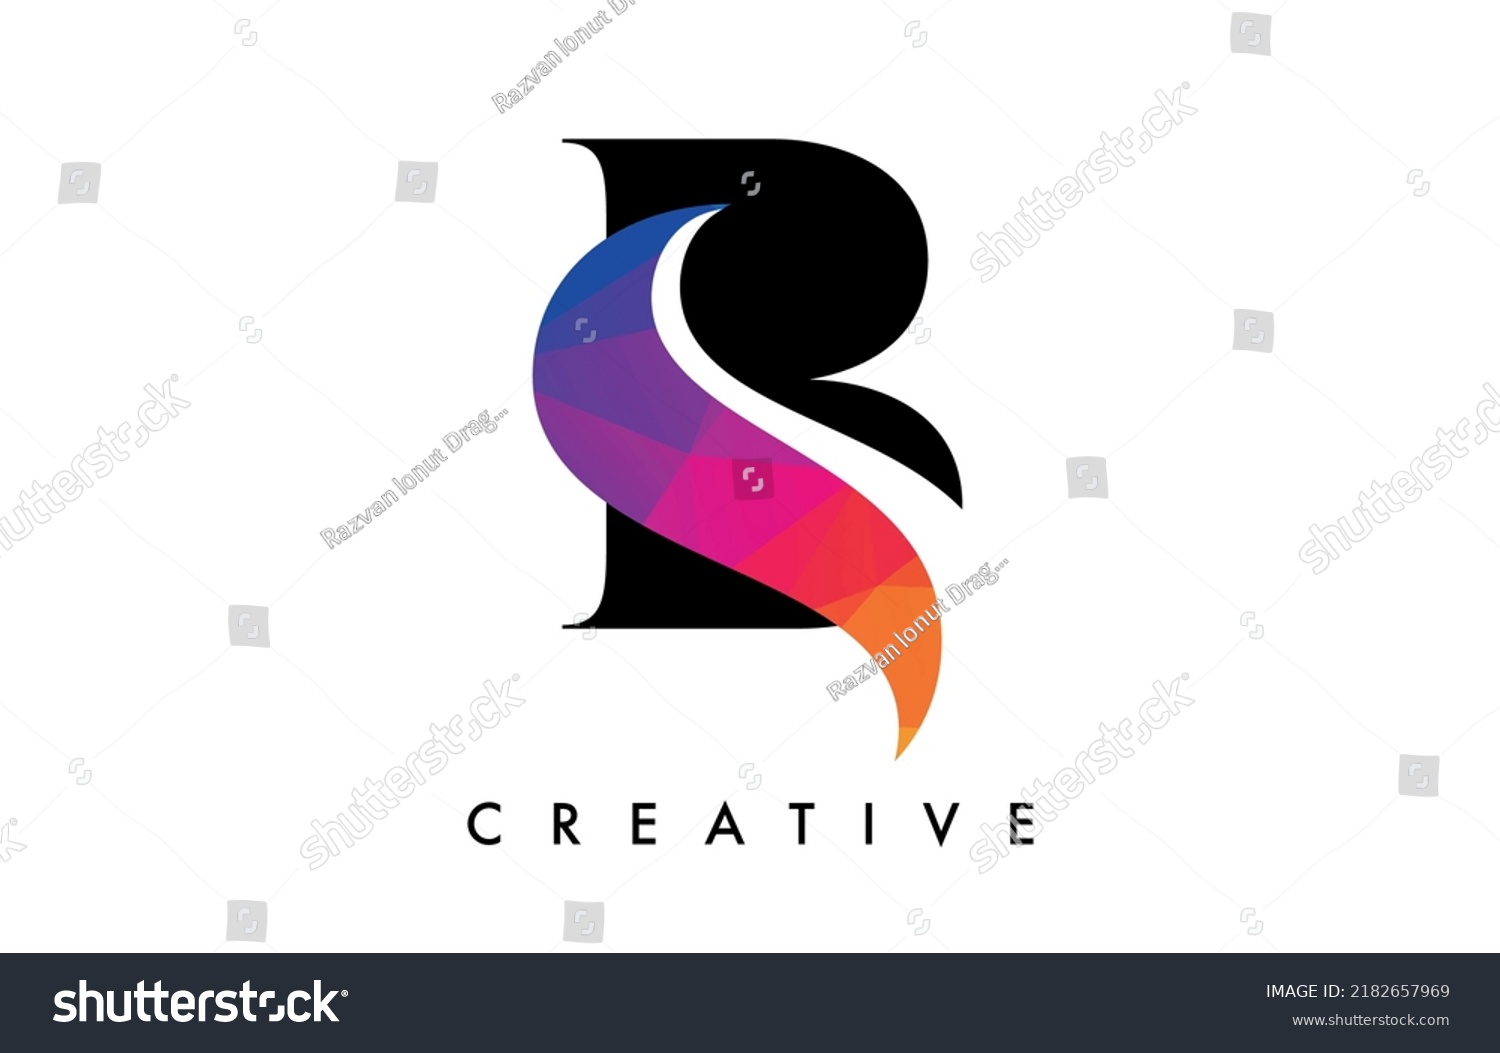 Sb Letter Design Creative Cut Colorful Stock Vector (Royalty Free ...